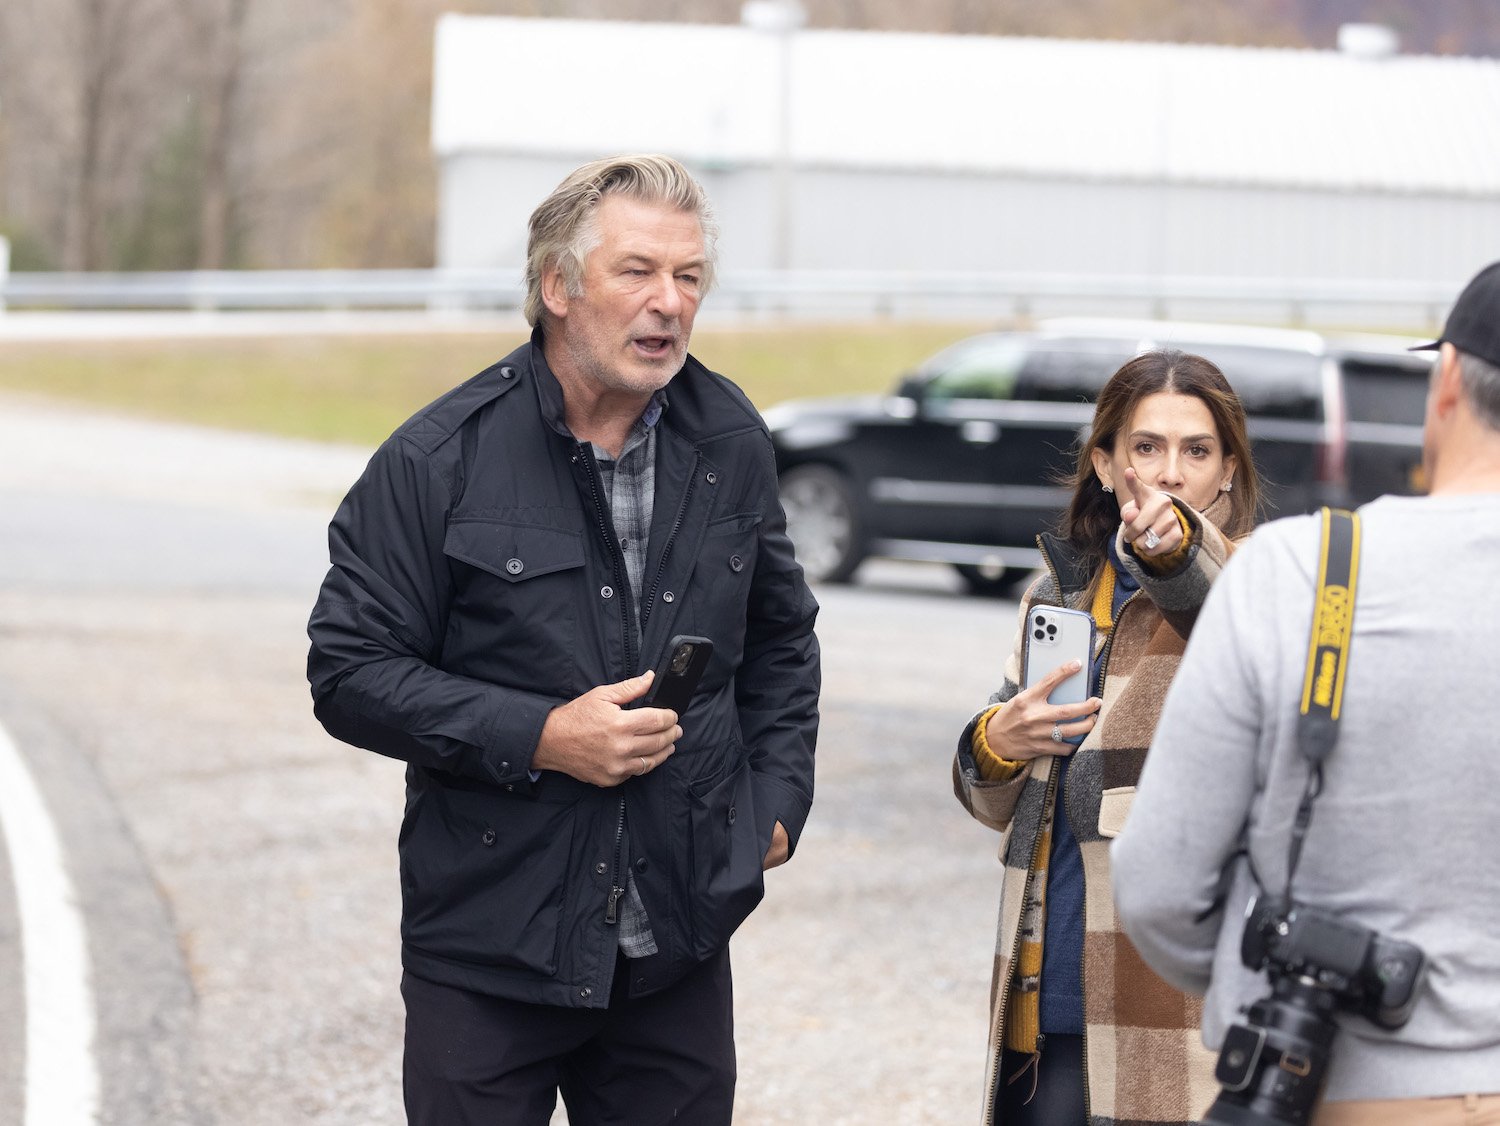 Alec Baldwin and Hilaria Baldwin speaking to reporters after the 'Rust' movie death that could send Baldwin to prison.